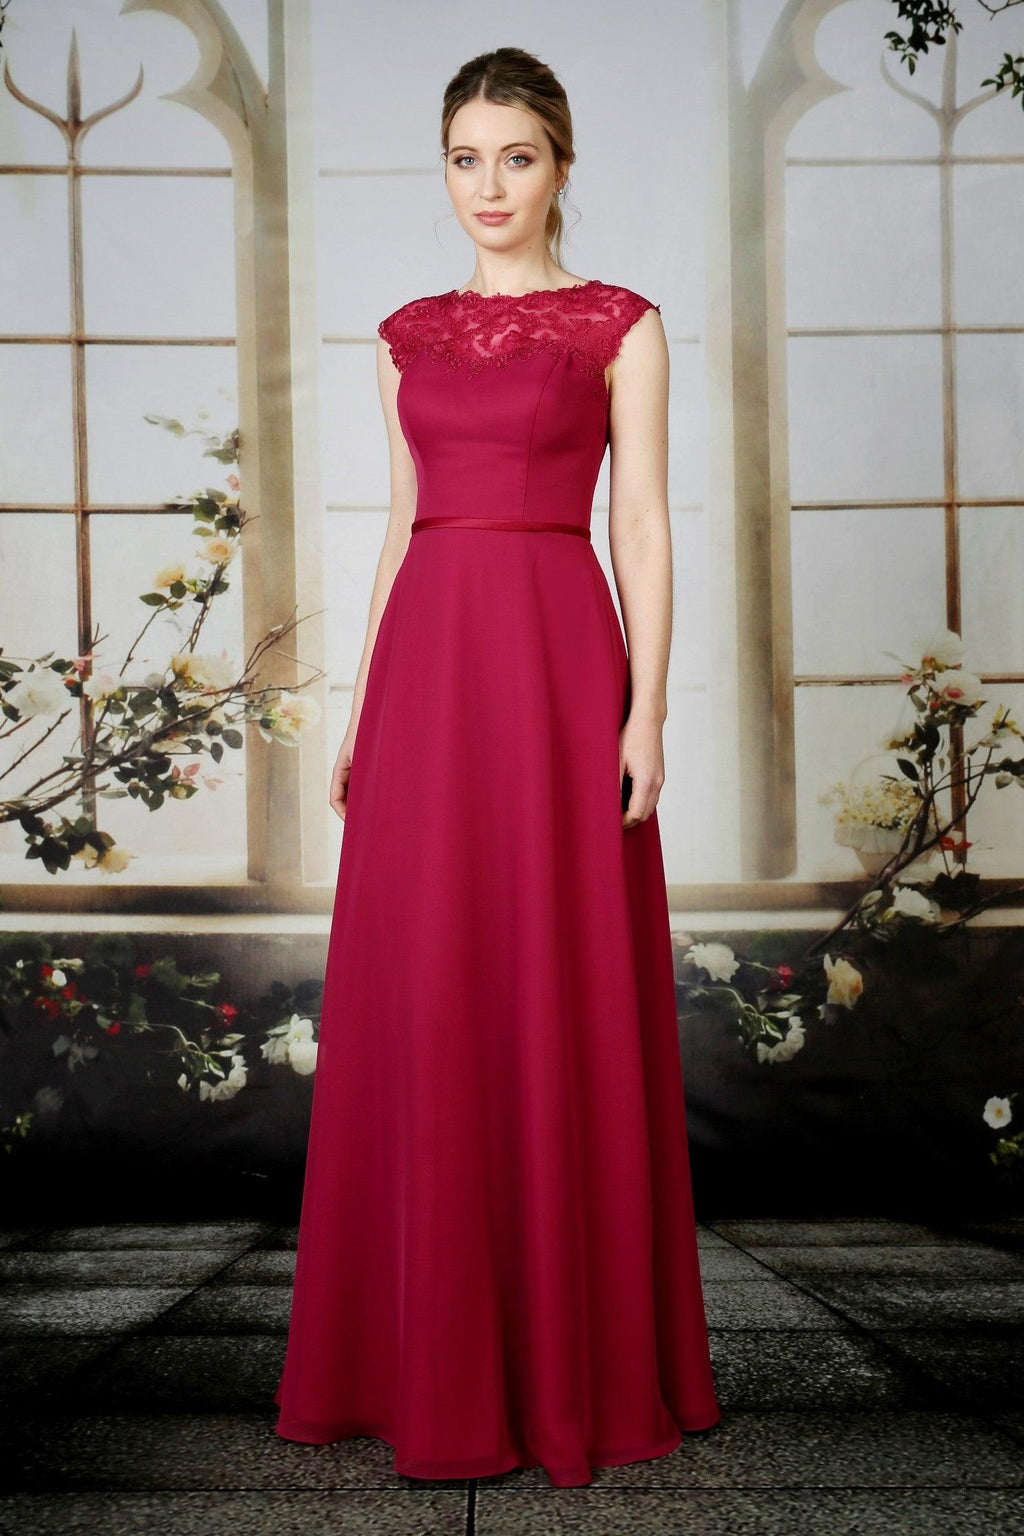 PETRA - Nieve Occasion - Adore Bridal and Occasion Wear